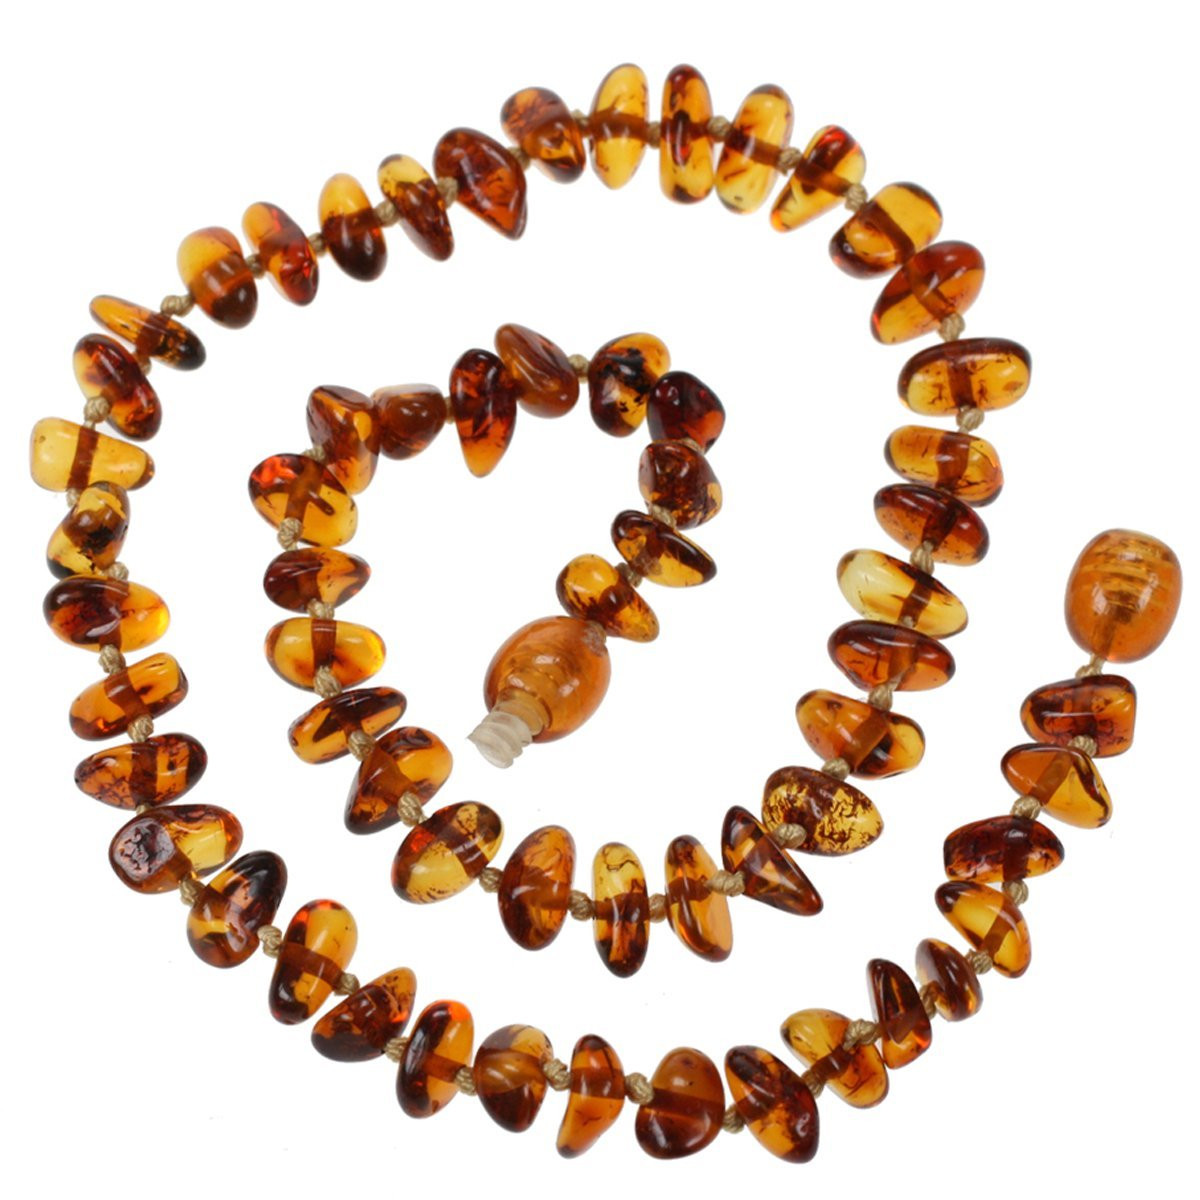 Amber Teething Necklace Review
 Baltic Amber Teething Necklace Review DentalsReview